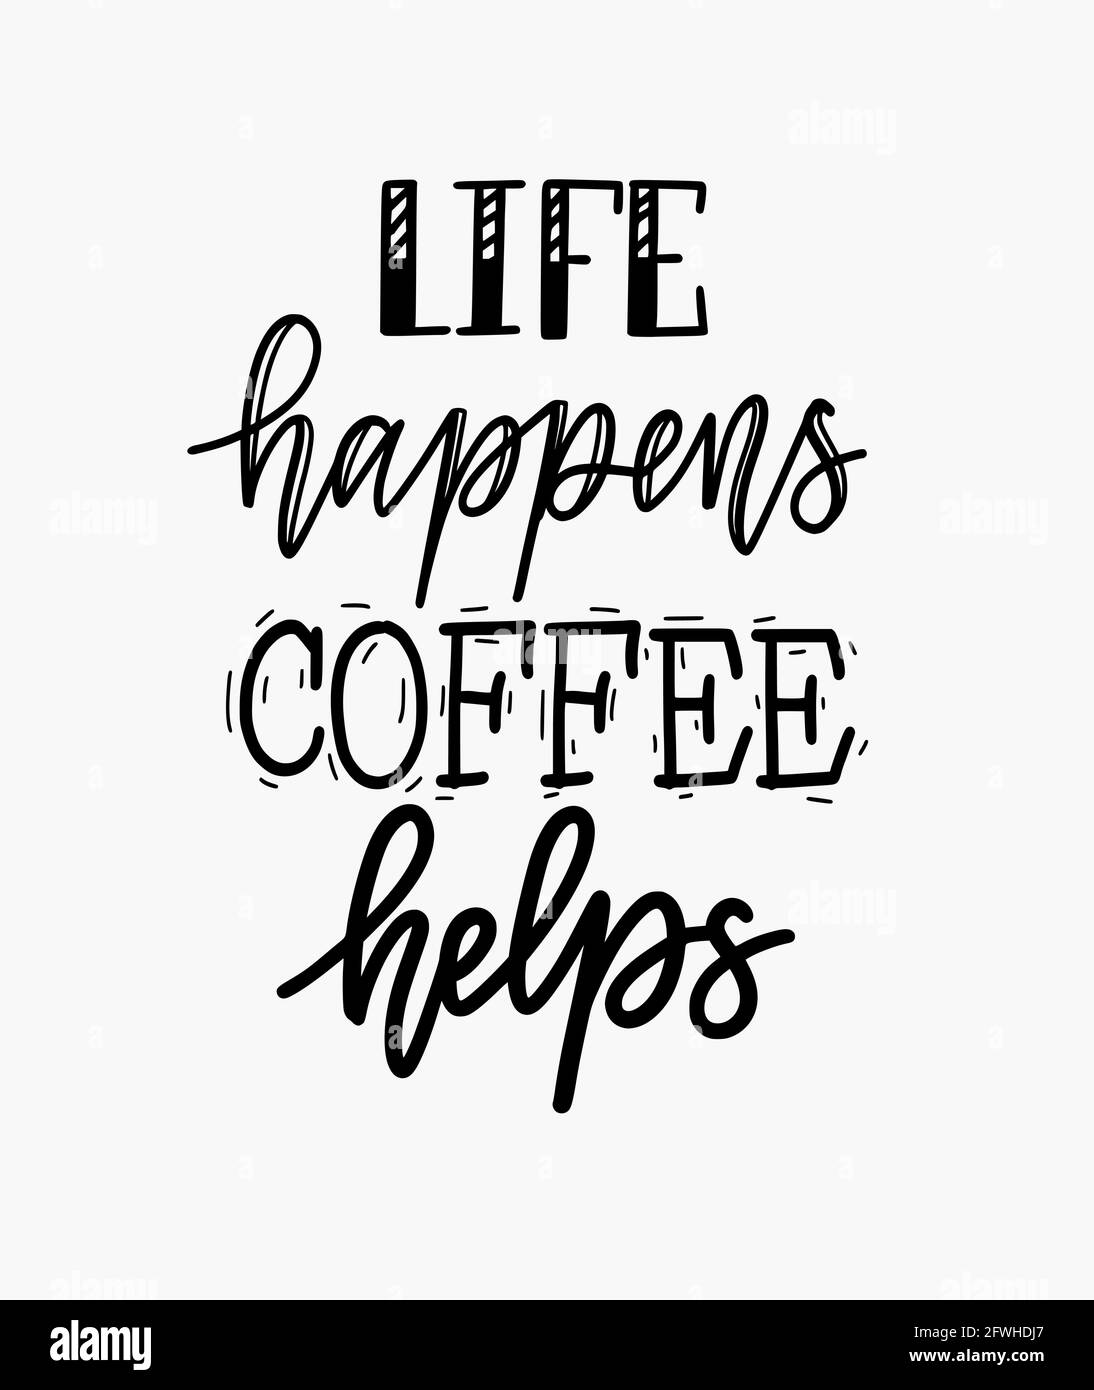 Life Happens. Image lettering. and Menu - topics Printable Coffee handwritten Art Bar art Alamy Stock Poster & Vector sign for Helps